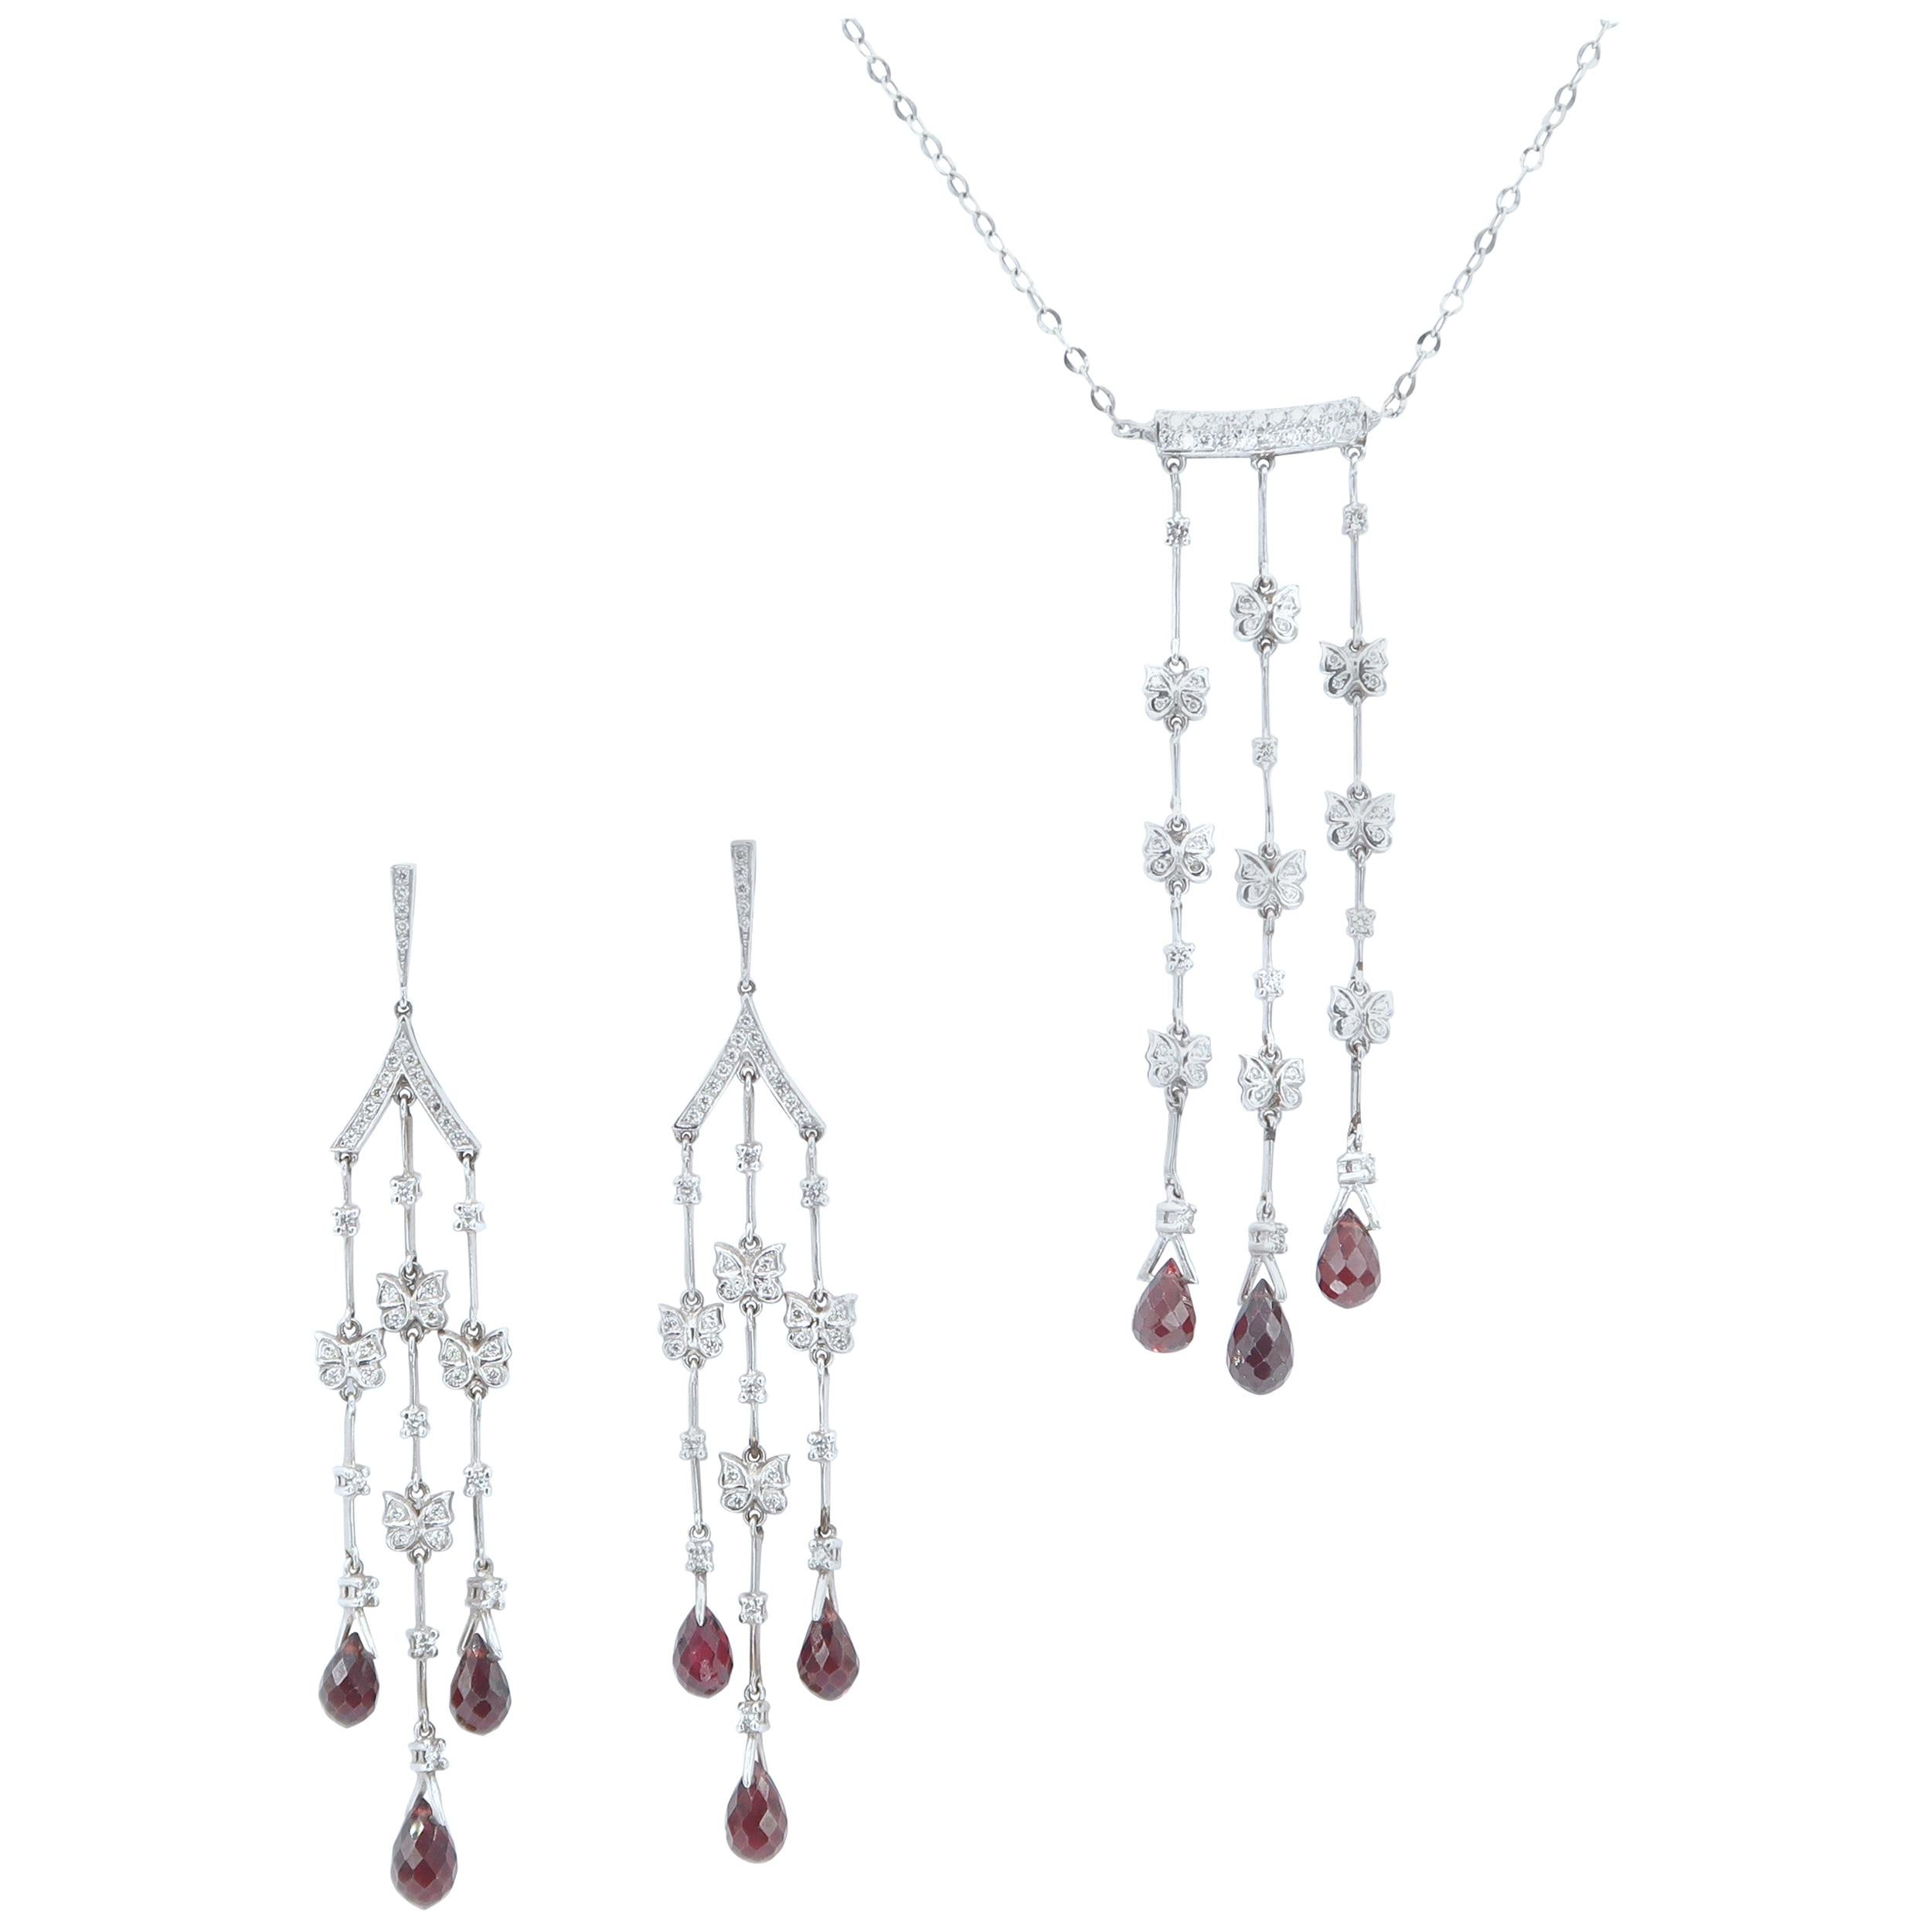 Butterfly Diamond Dangle Earrings with Garnet Drops in 18K White Gold
(Necklace not included)

Gold : 18K White Gold 17.52g.
Diamond : 1.49ct.
Garnet : 11.96cts.
Length : 3.5